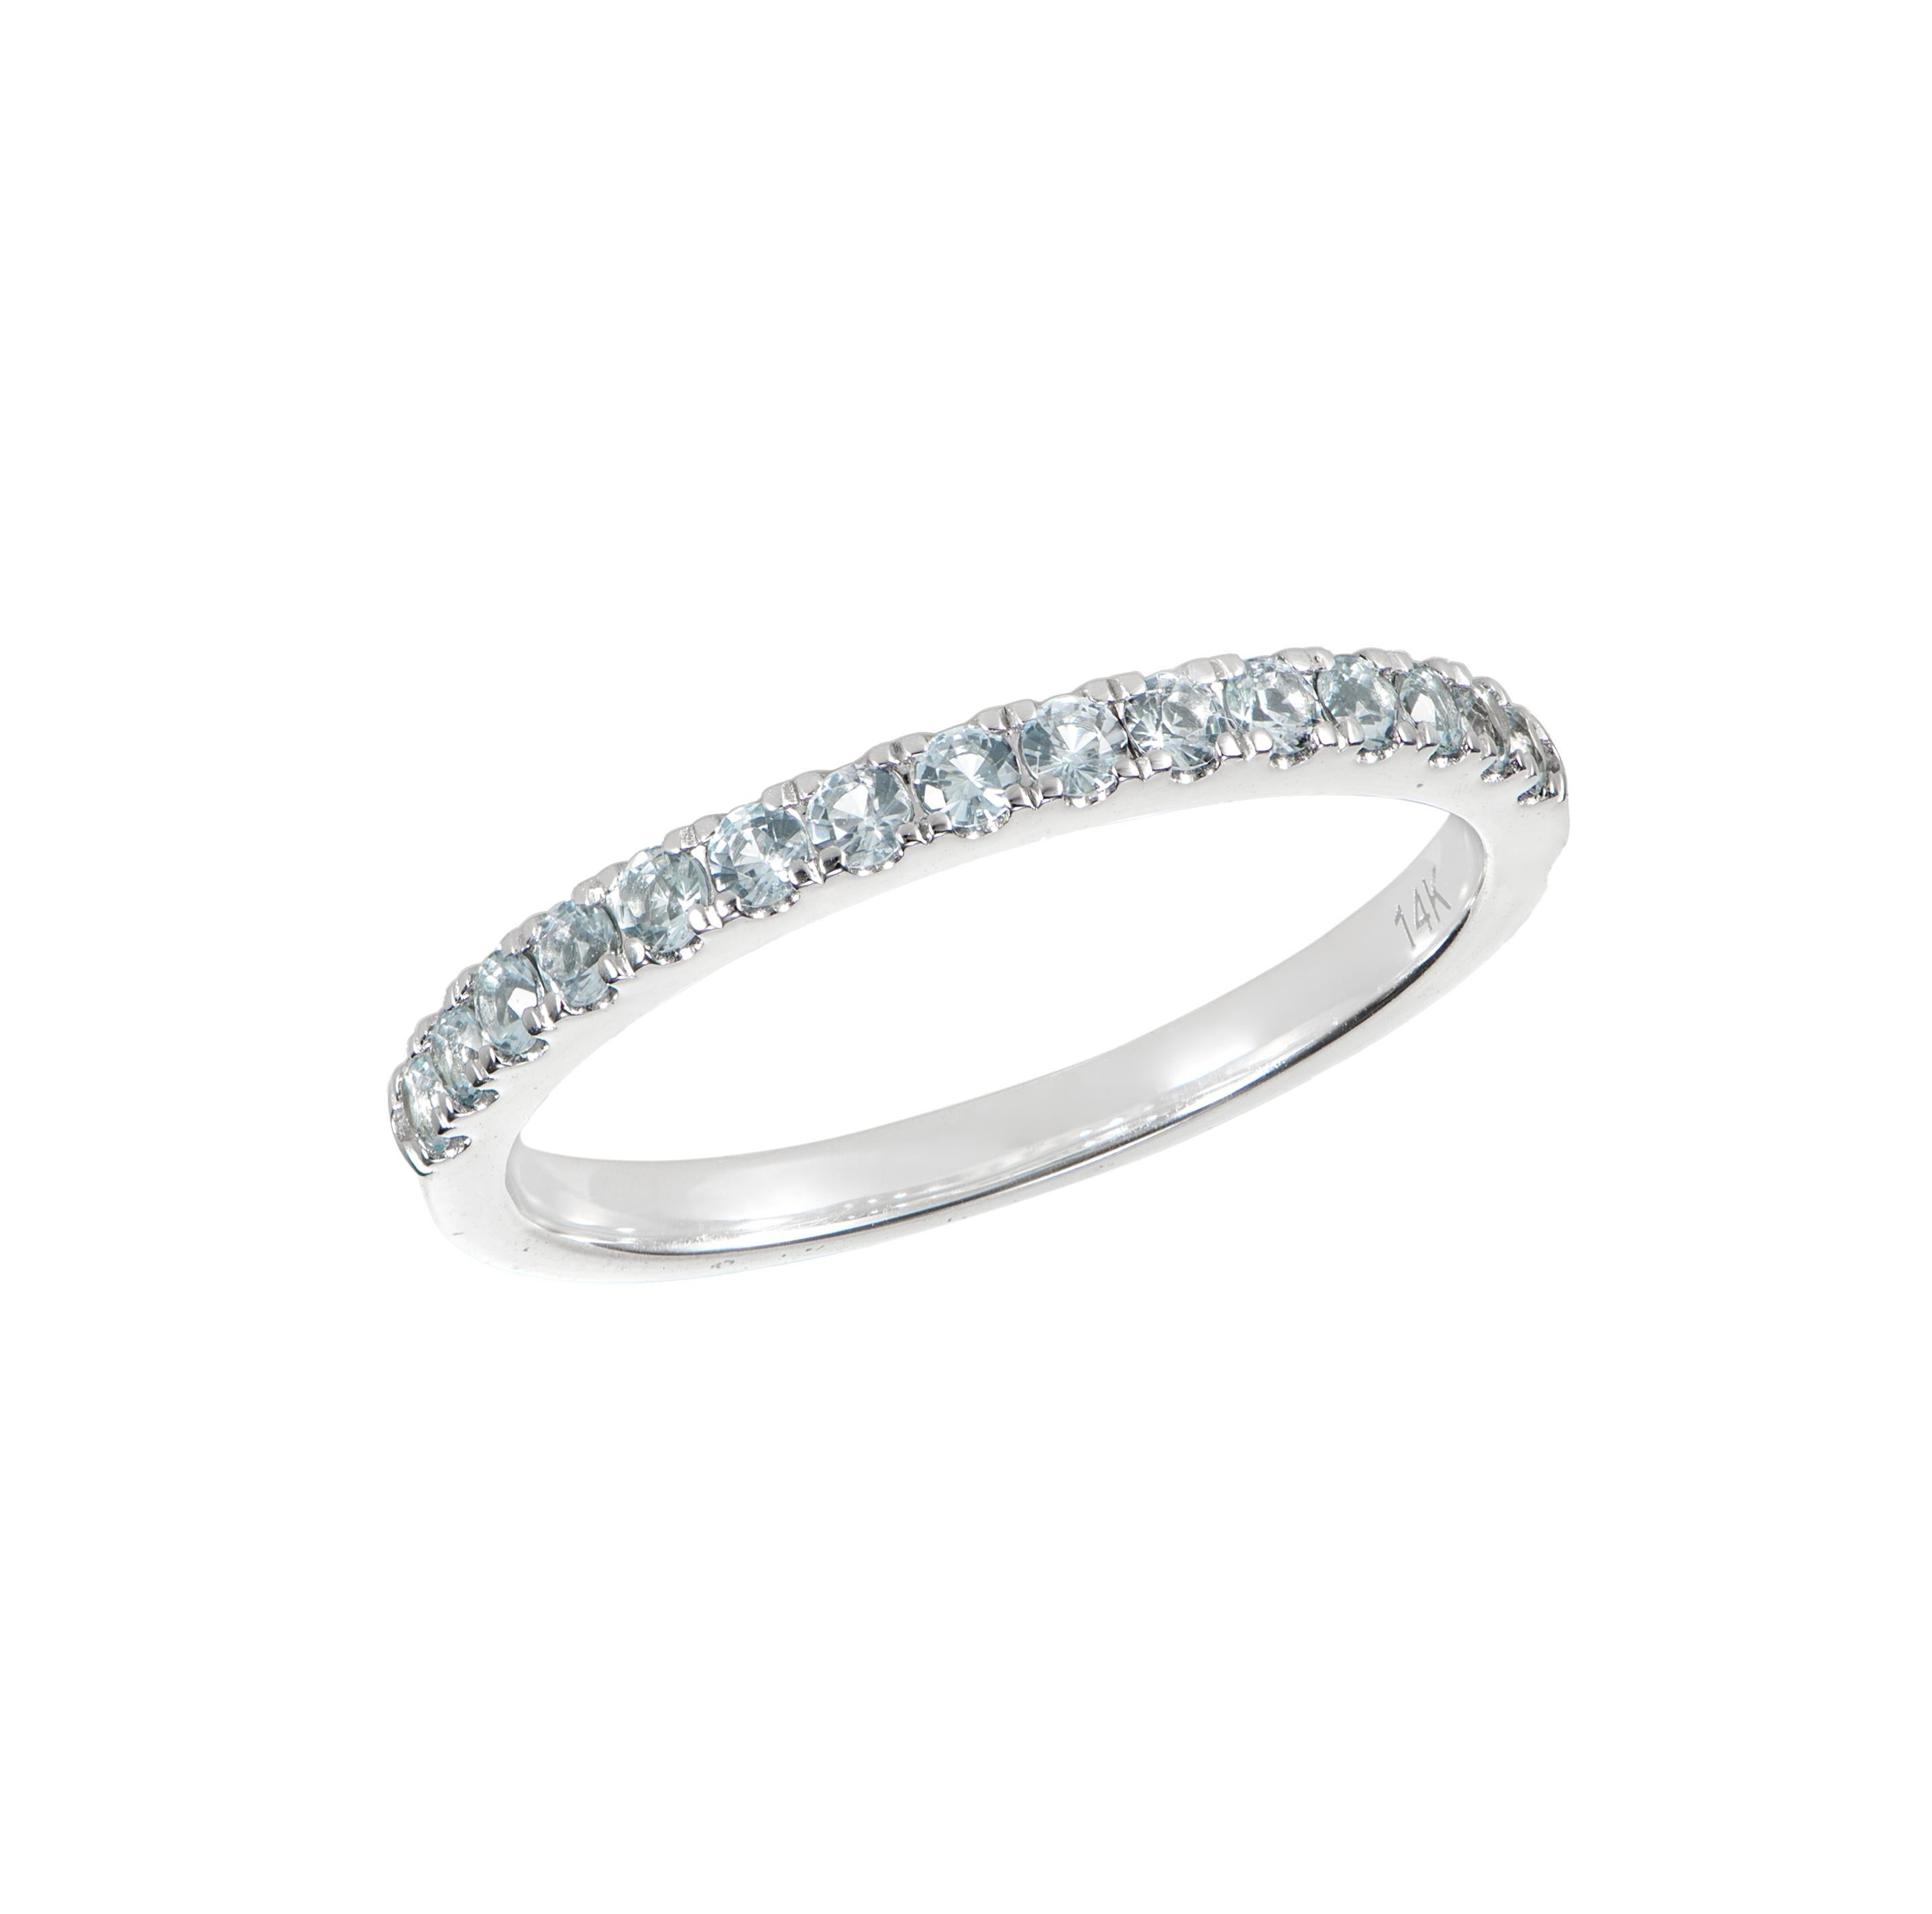 Contemporary 0.33 Carat Blue Topaz Eternity Ring in 14Karat White Gold. For Sale